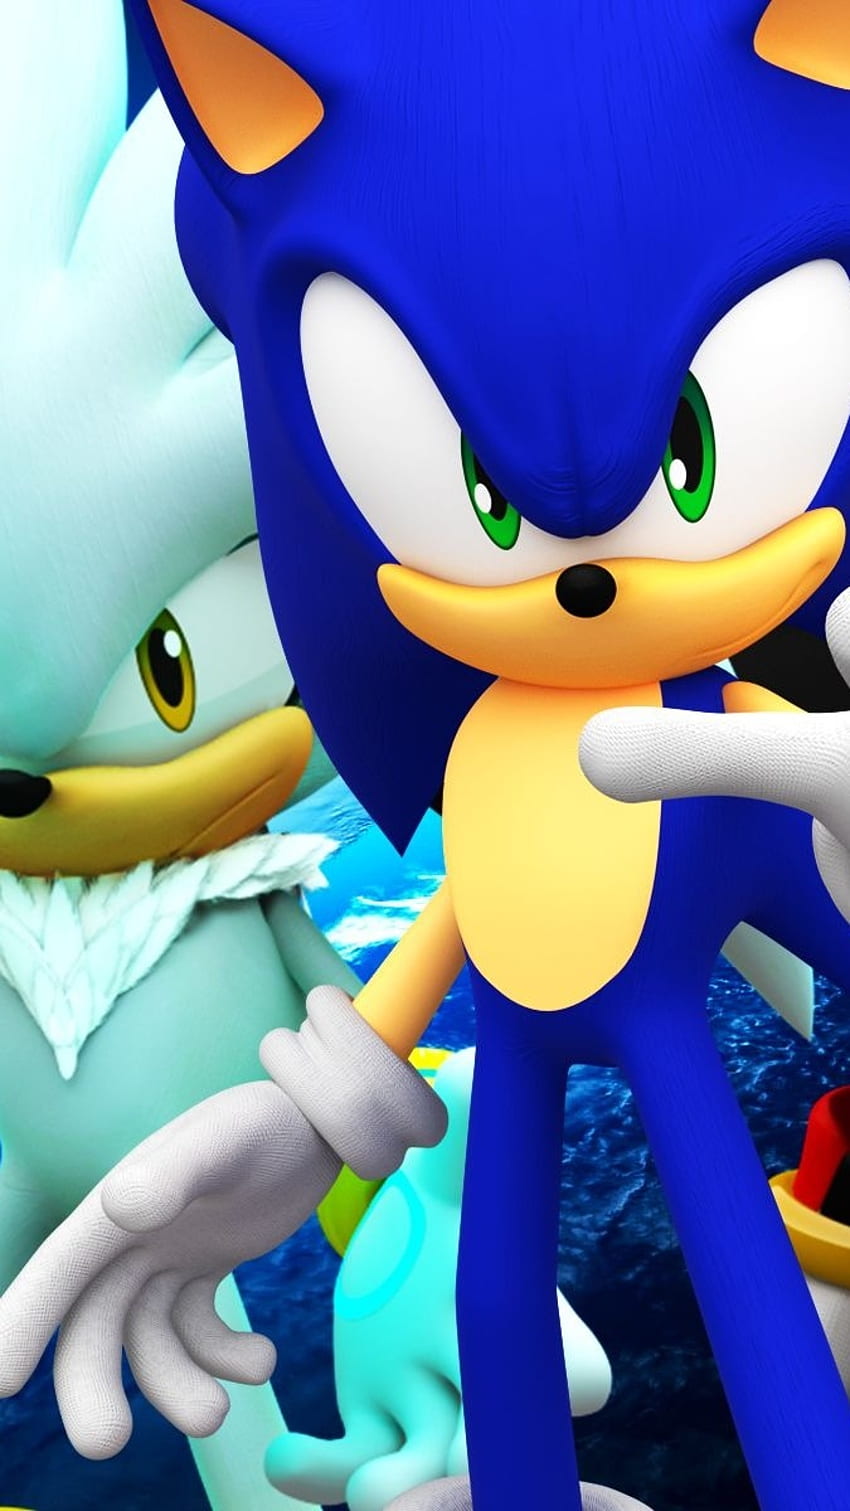 Every Sonic The Hedgehog Show Ranked By IMDB